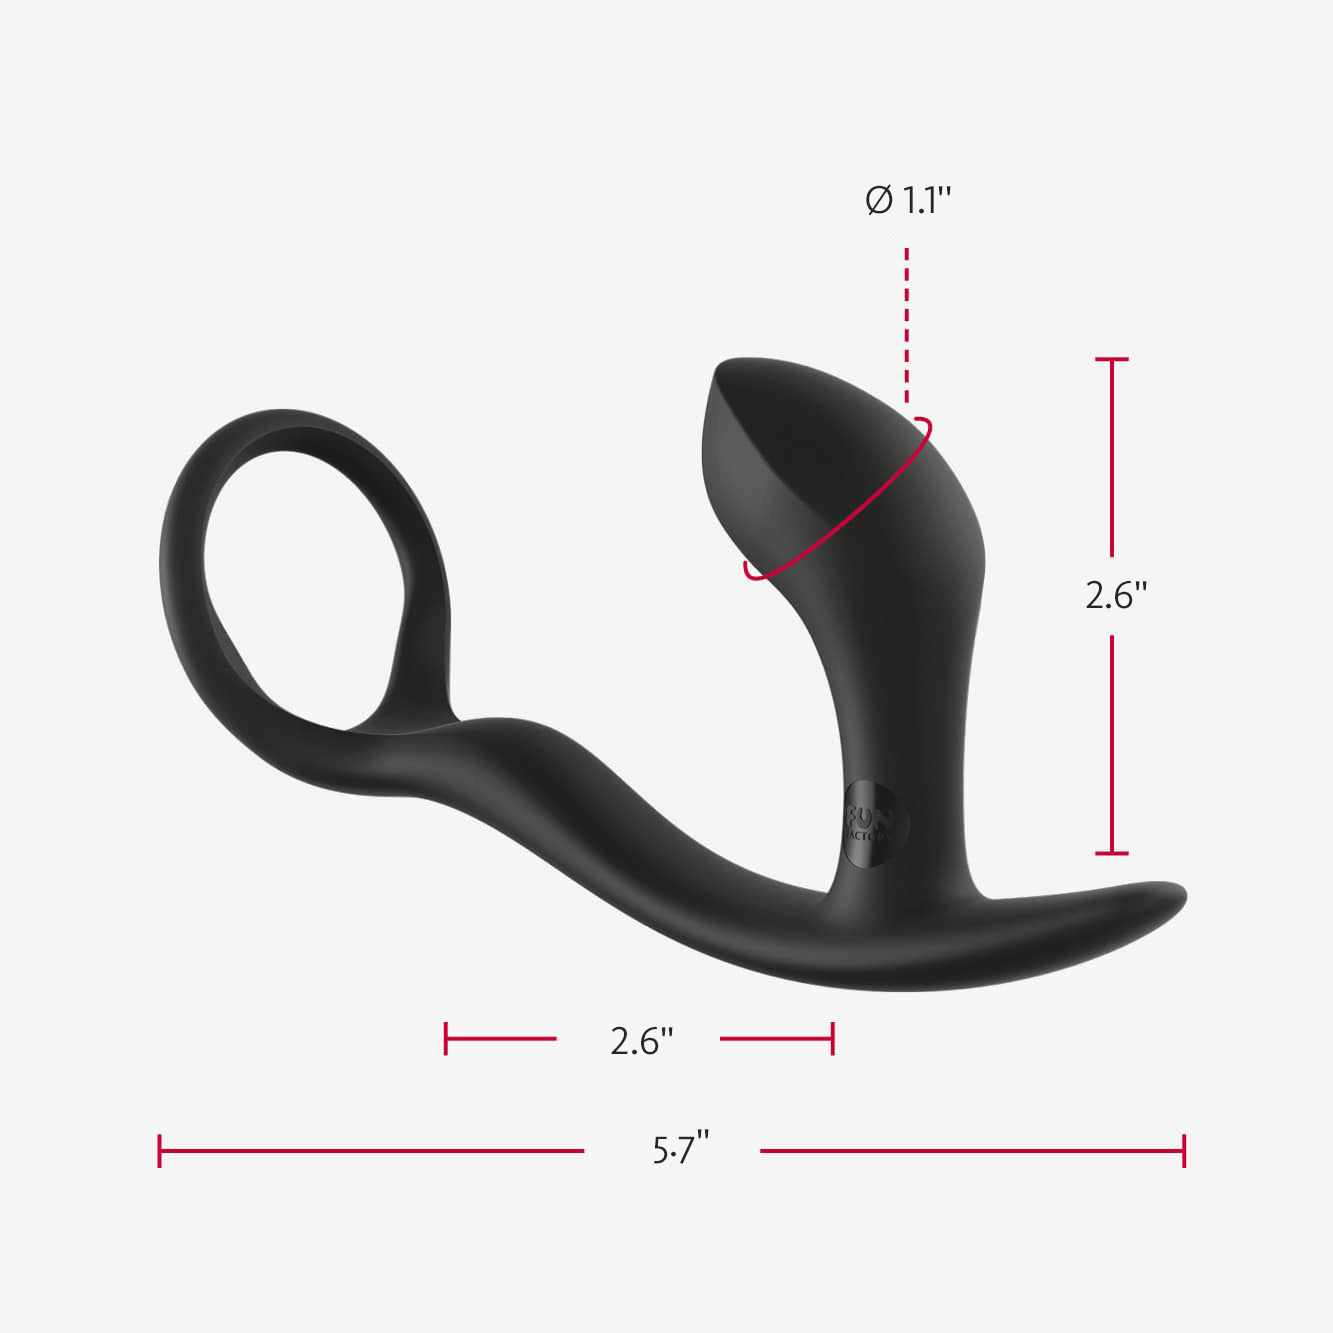 Measurements for cock ring BOOTIE RING